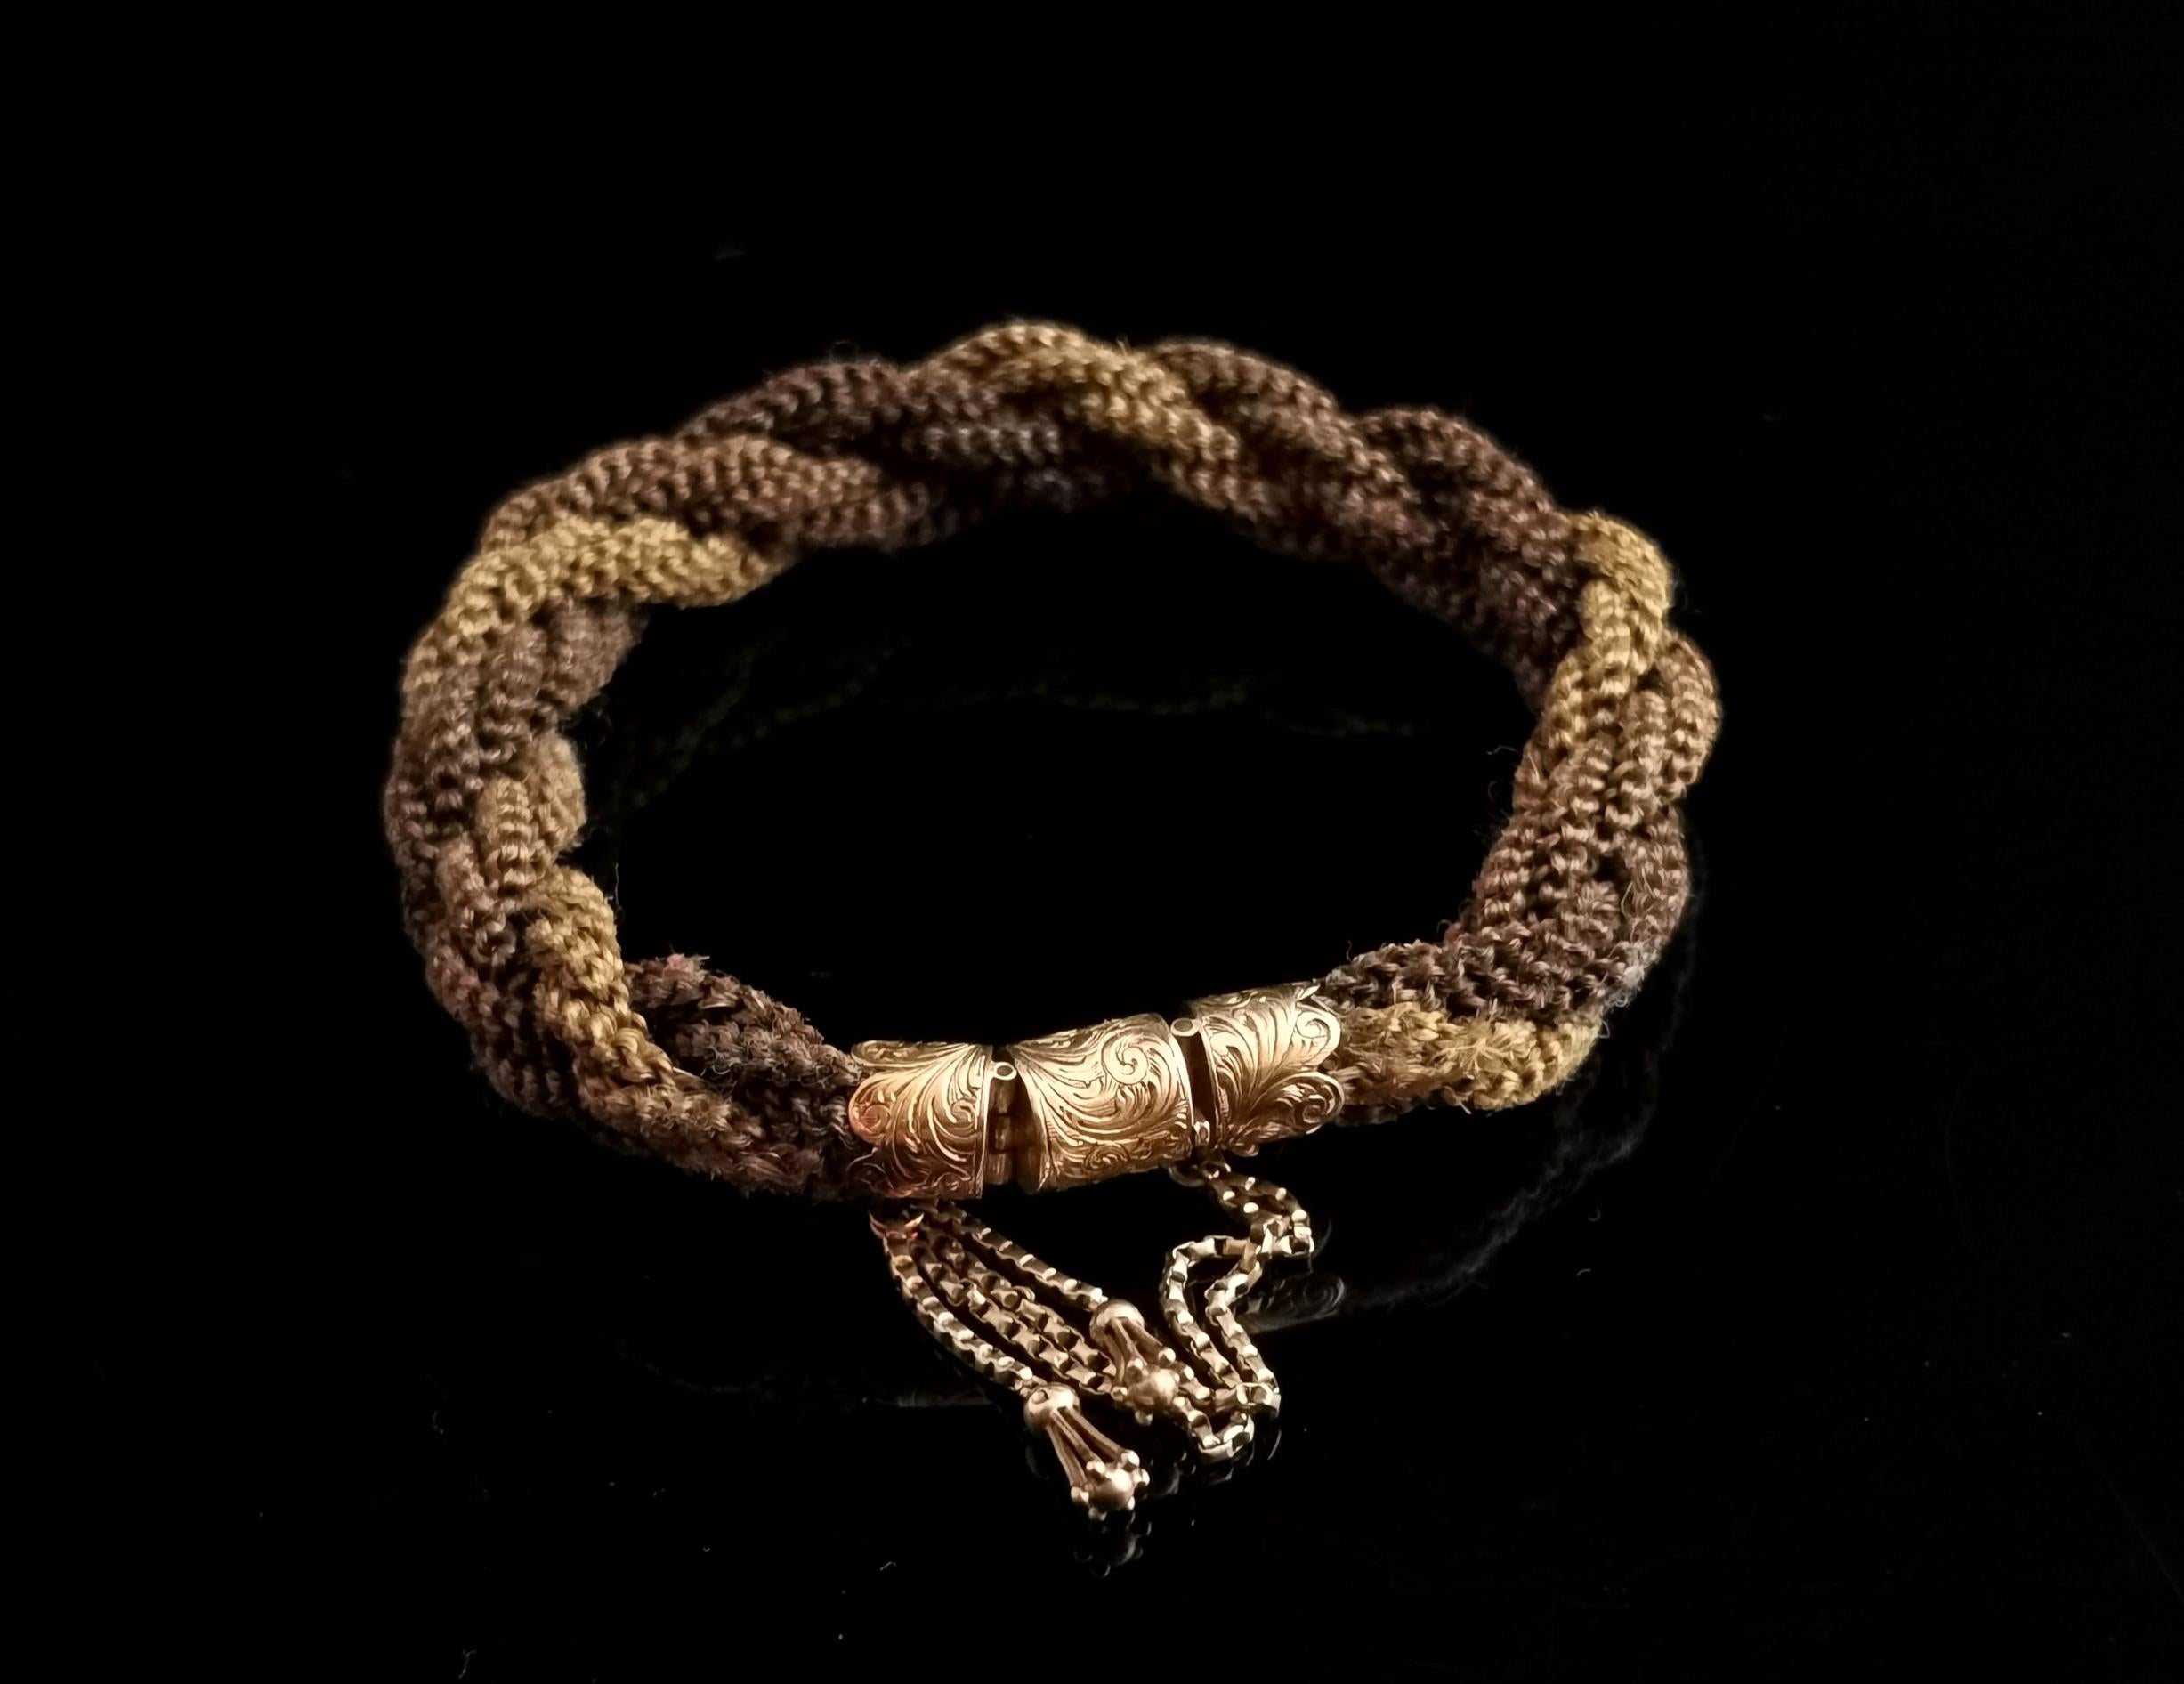 A beautiful antique Victorian era mourning bracelet.

The bracelet is made from tightly woven and intertwined stands of hollow hairwork, there are two shades a medium and light brown, this tells us that the bracelet was probably crafted from the